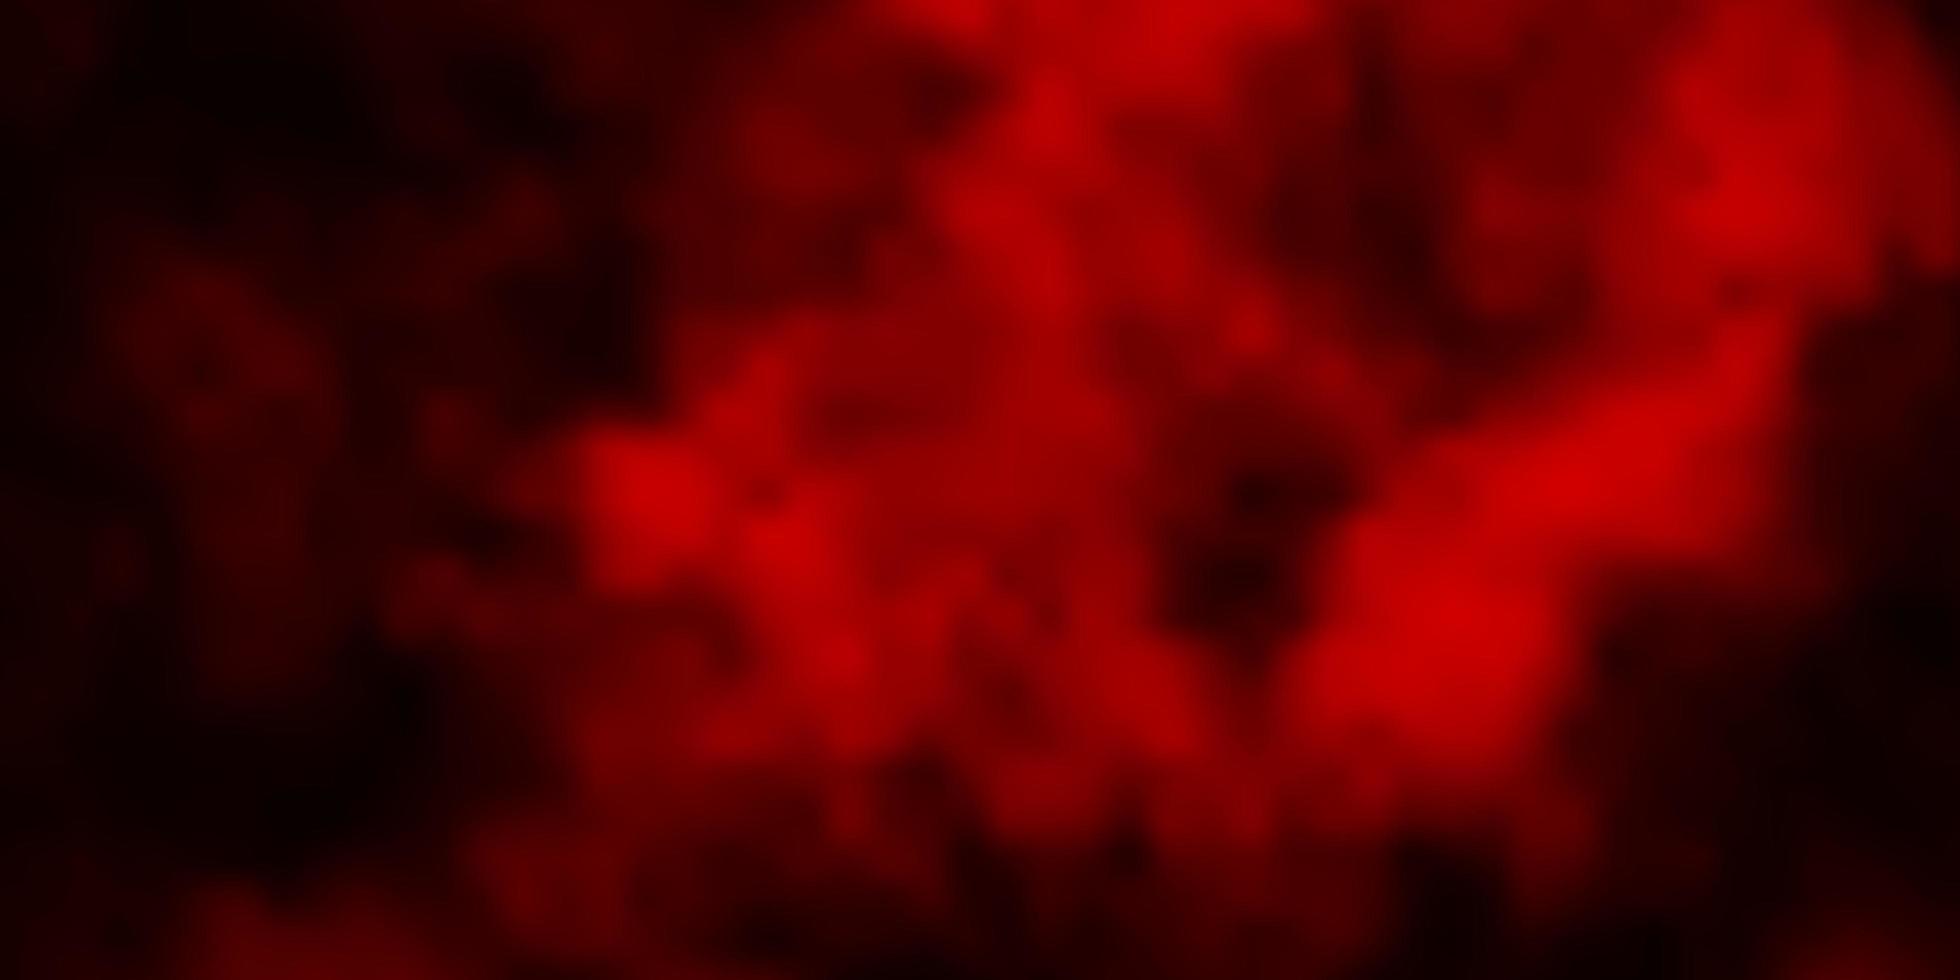 Dark Red vector pattern with clouds.